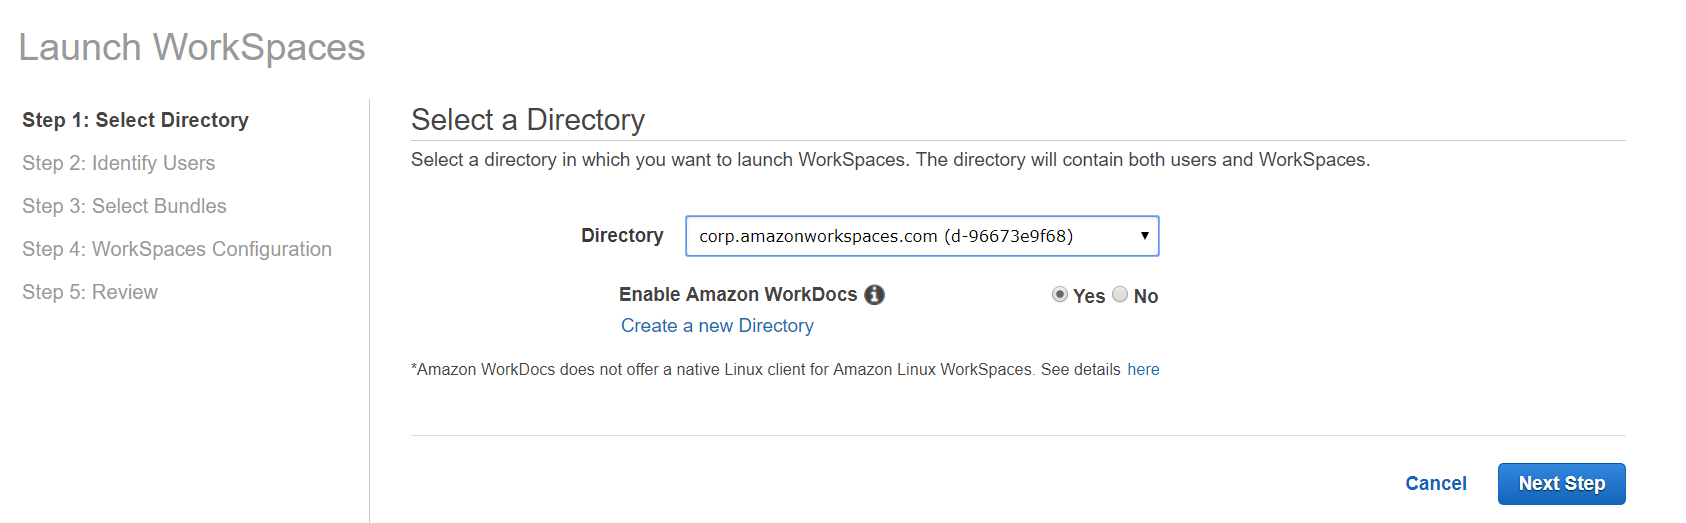 Launch WorkSpaces

Step 1: Select Directory

Step 2: Identify Users

Step 3: Select Bundles

Step 4: WorkSpaces Configuration
Step 5: Review

Select a Directory

Select a directory in which you want to launch WorkSpaces. The directory will contain both users and WorkSpaces.

Directory corp.amazonworkspaces.com (d-96673e9f68) v

Enable Amazon WorkDocs @ @ Yes ~ No
Create a new Directory

“Amazon WorkDocs does not offer a native Linux client for Amazon Linux WorkSpaces. See details here

Cancel Next Step